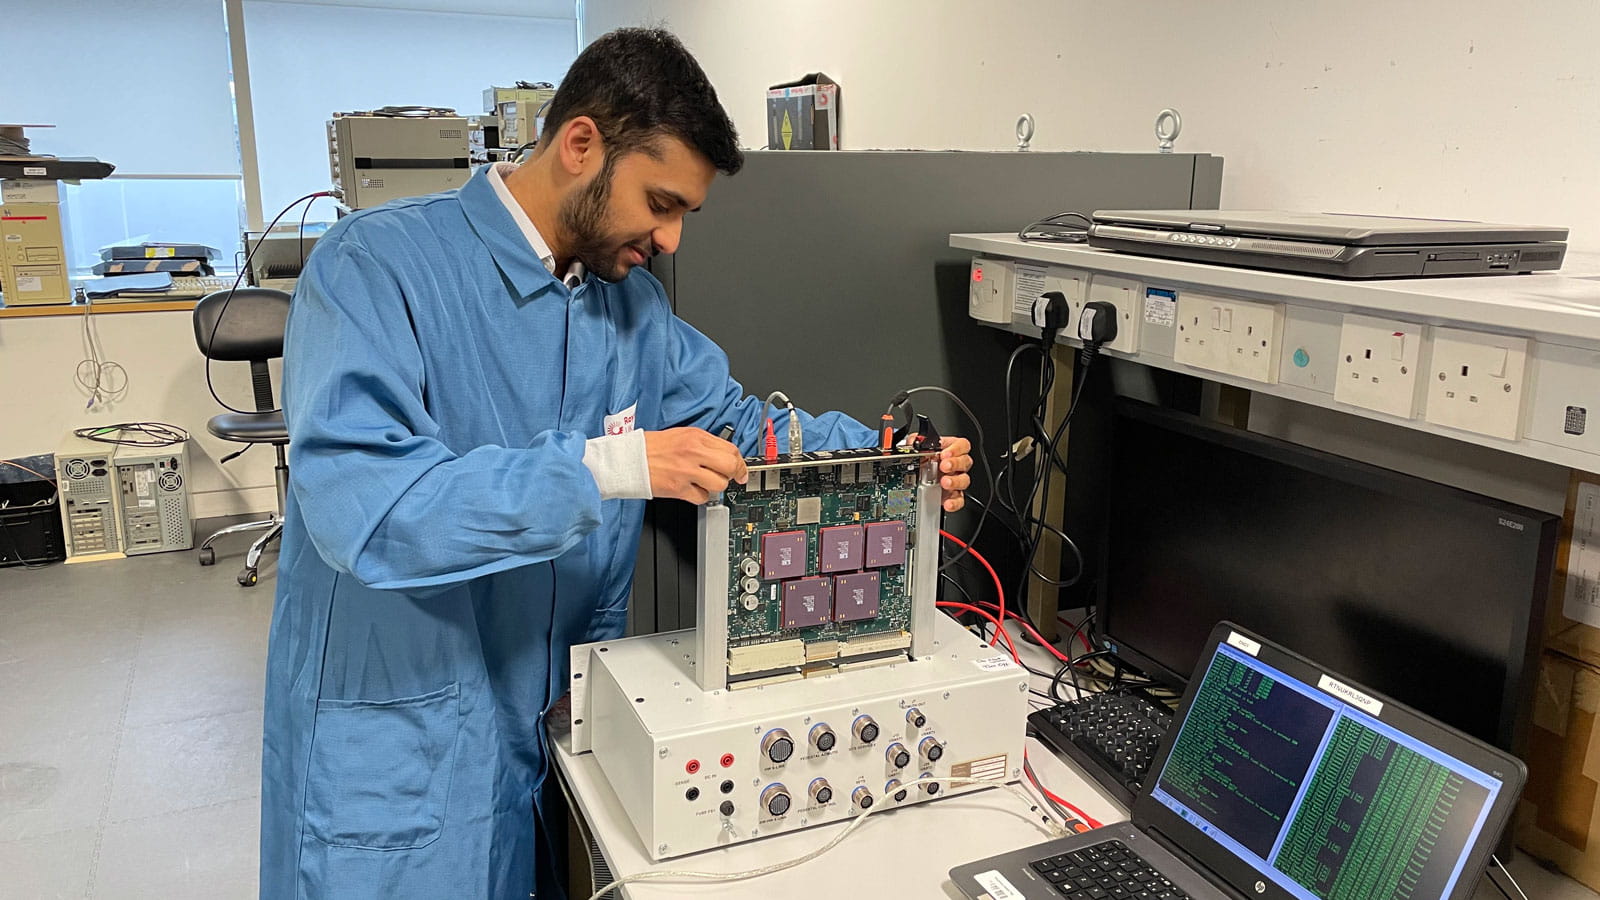 Chinmay tests a professor board for the Condor MK3 radar system on a test rig.   